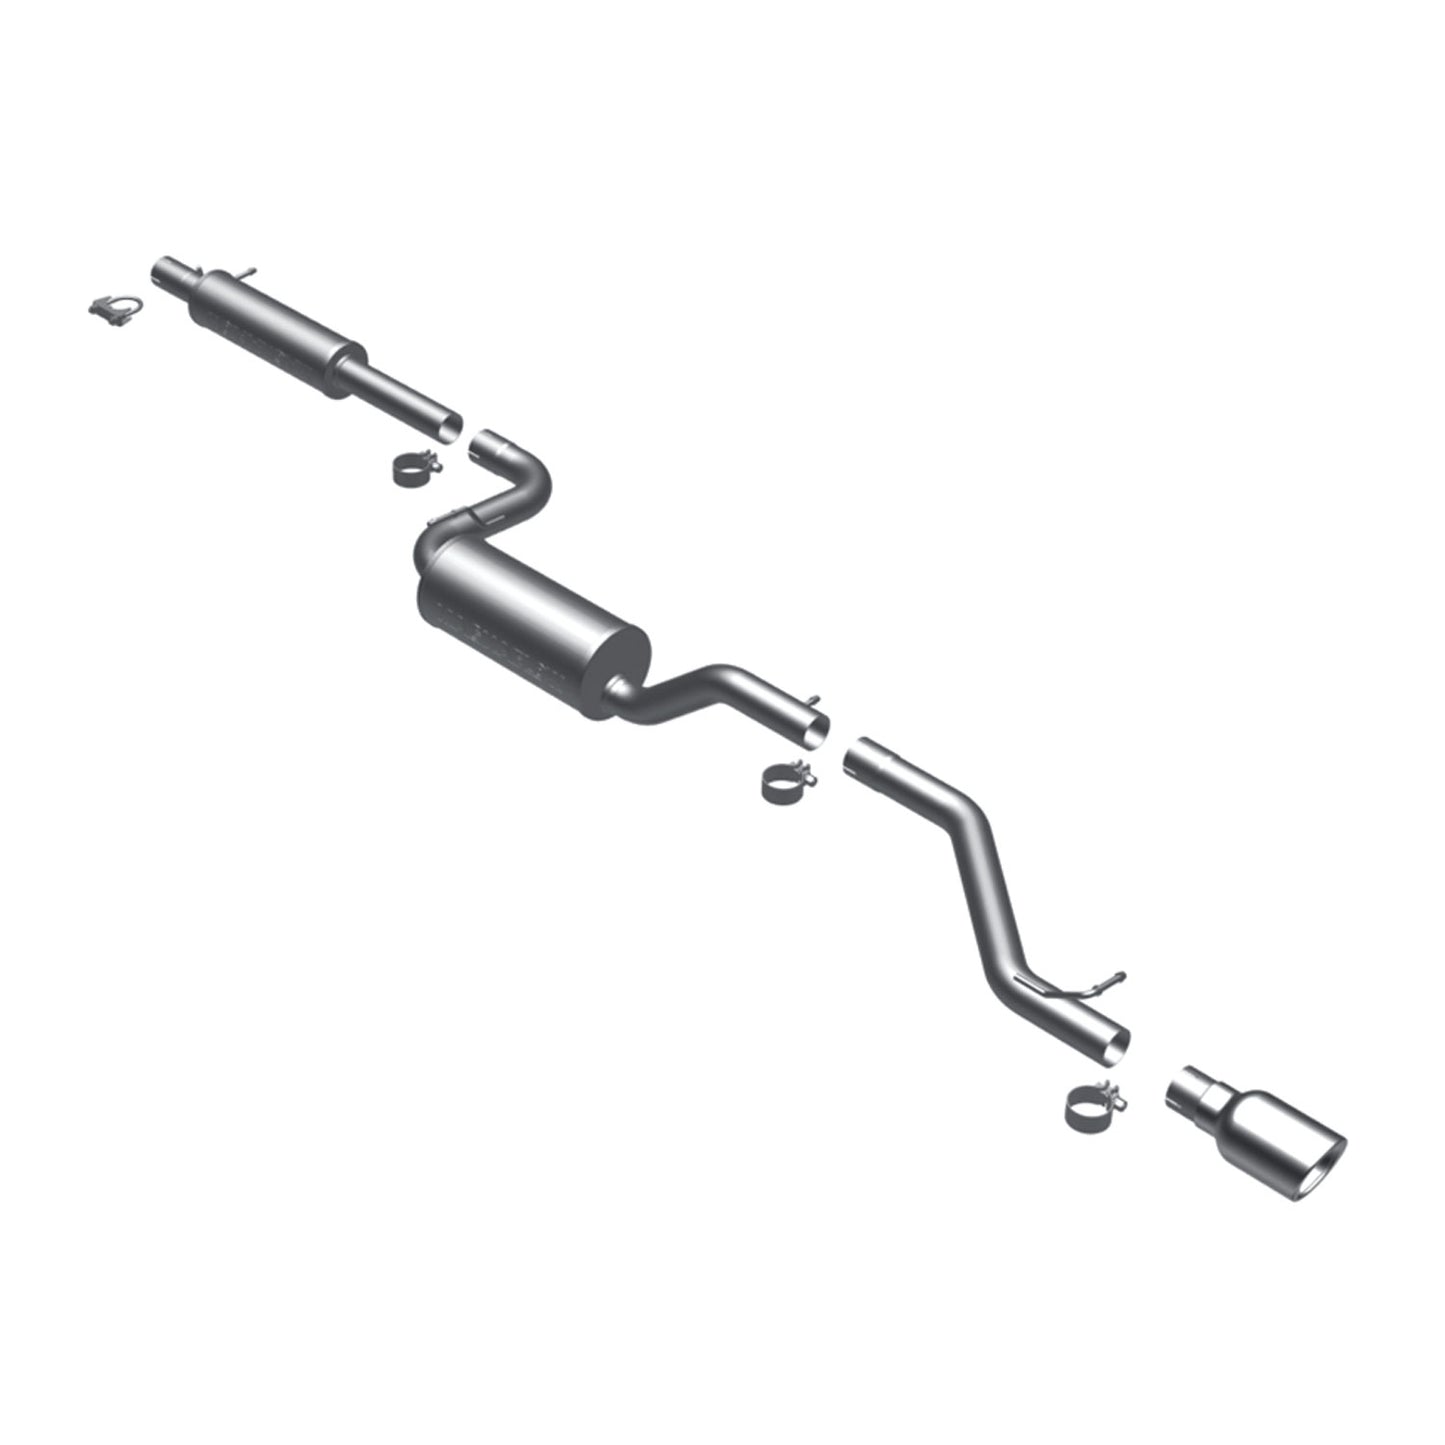 MagnaFlow 2007-2009 Mazda 3 Street Series Cat-Back Performance Exhaust System